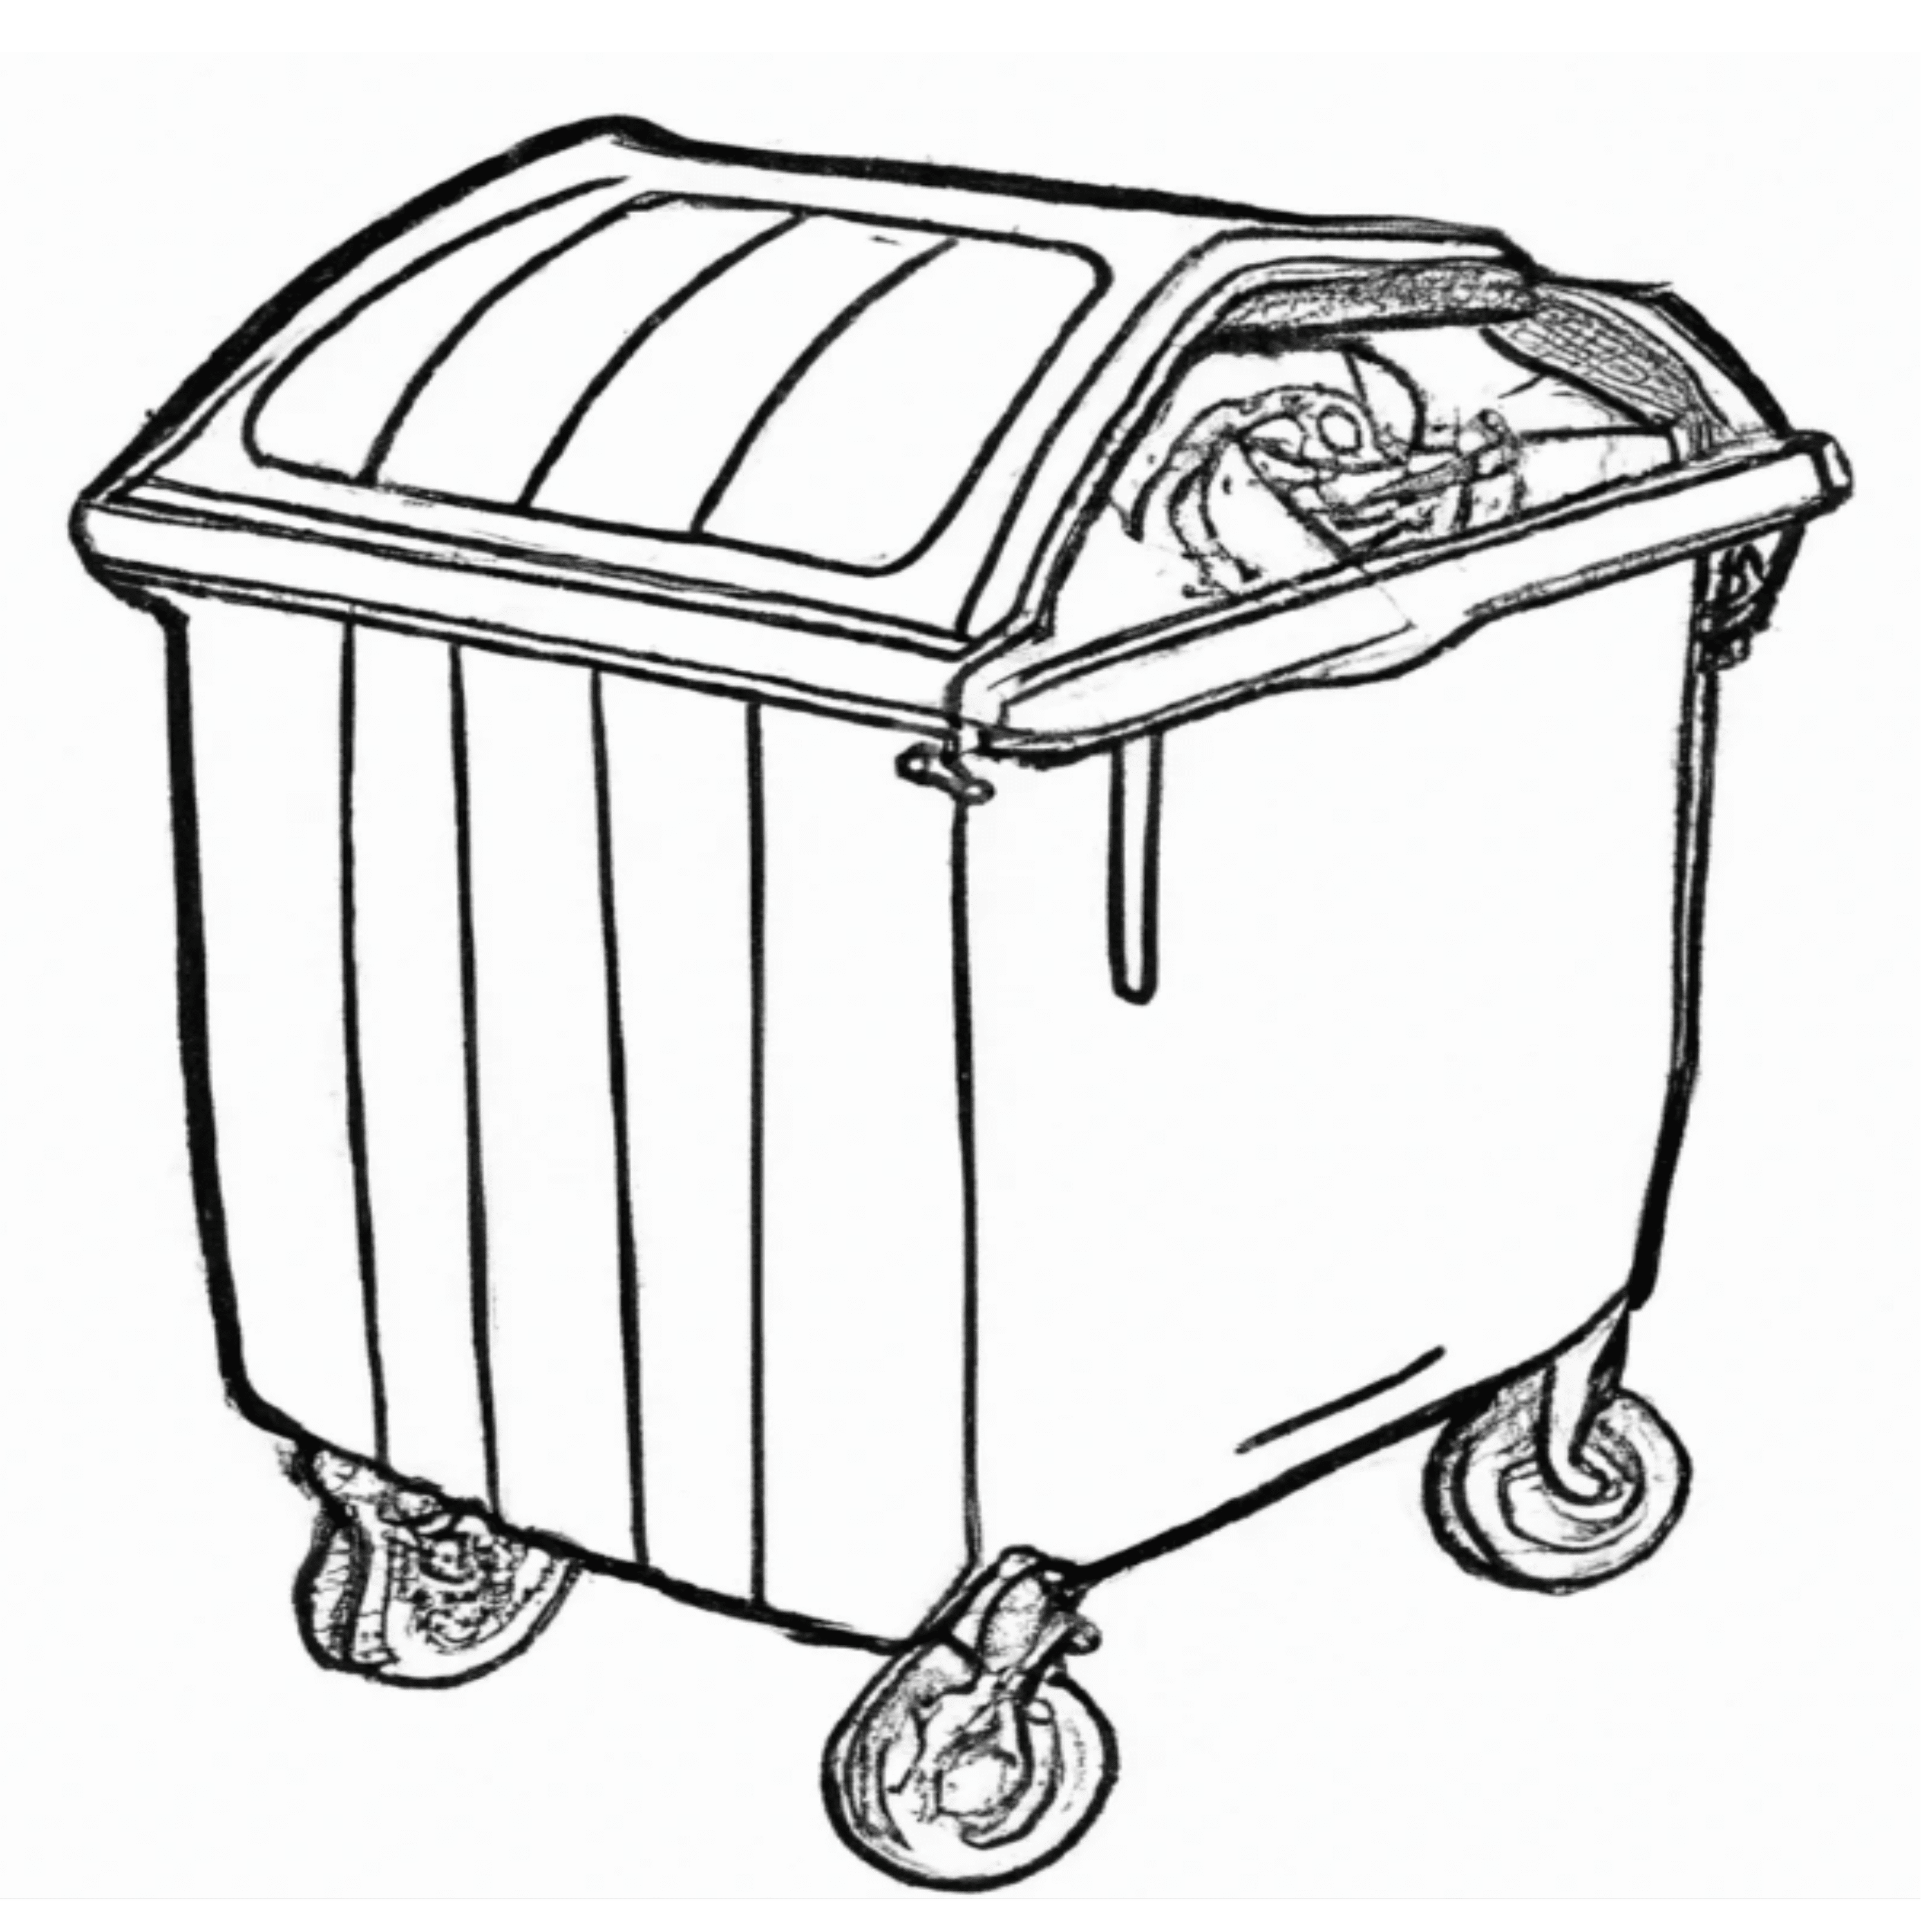 Line drawing of a rubbish skip